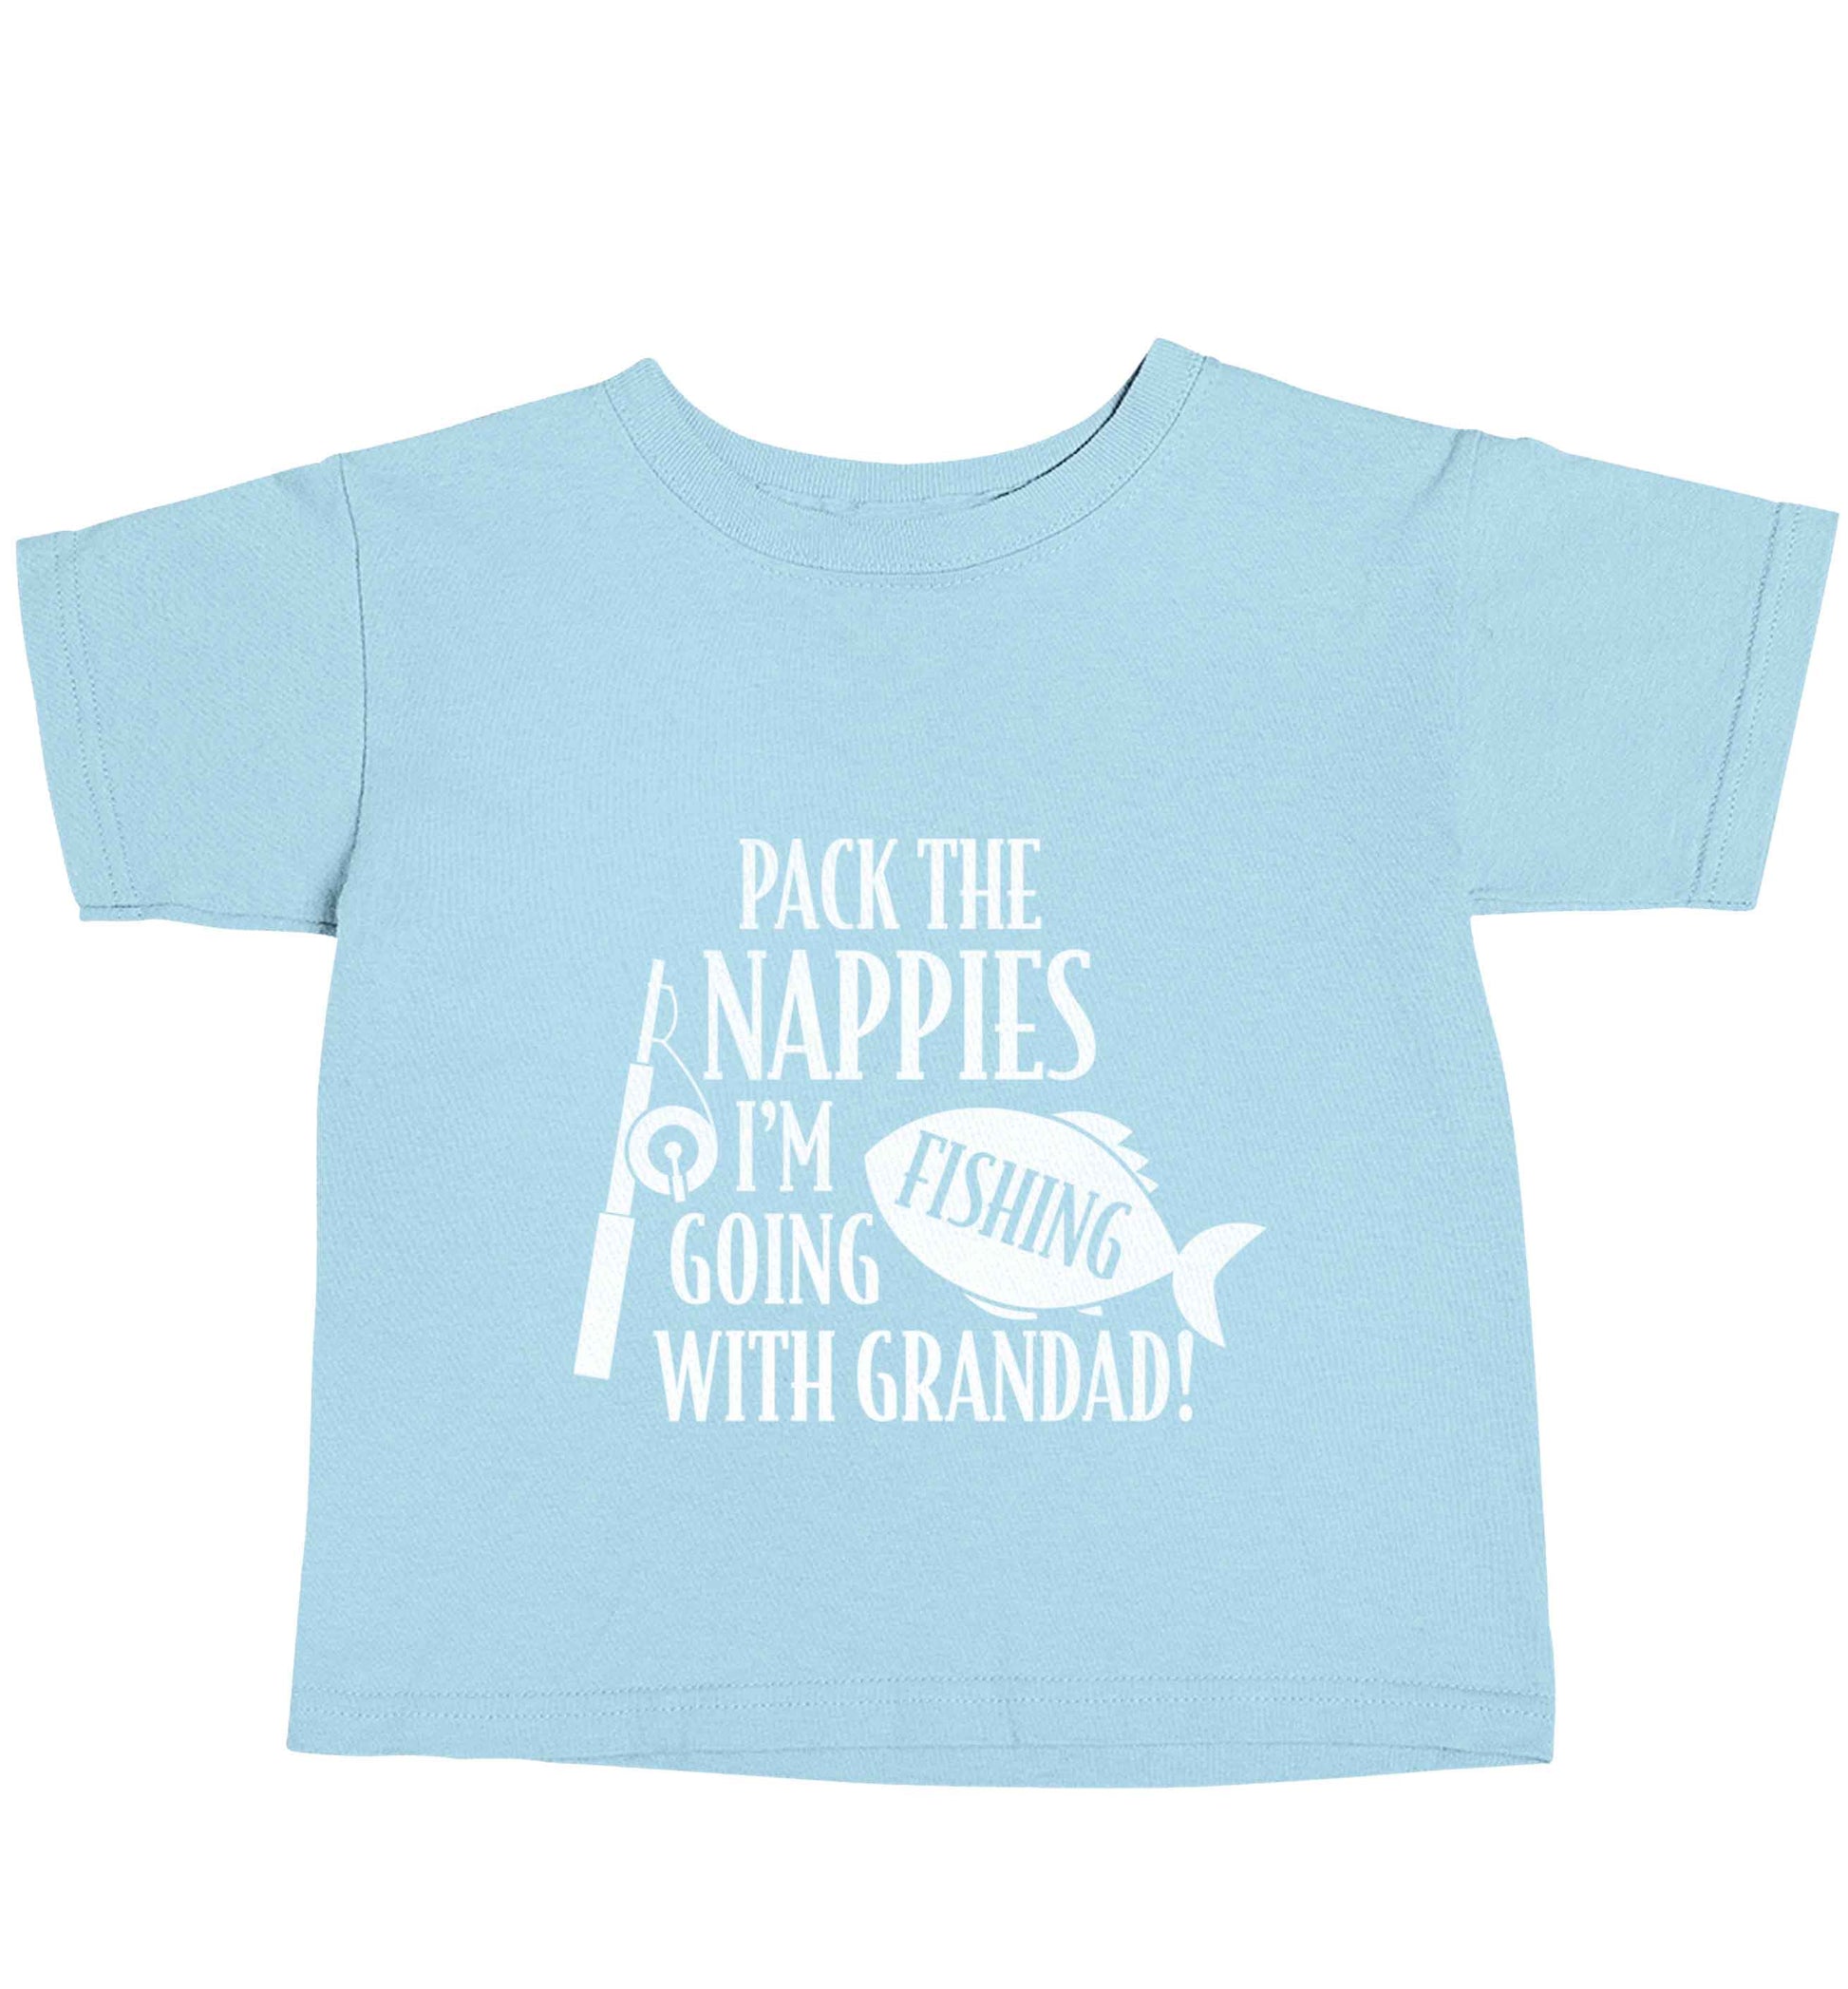 Pack the nappies I'm going fishing with Grandad light blue baby toddler Tshirt 2 Years